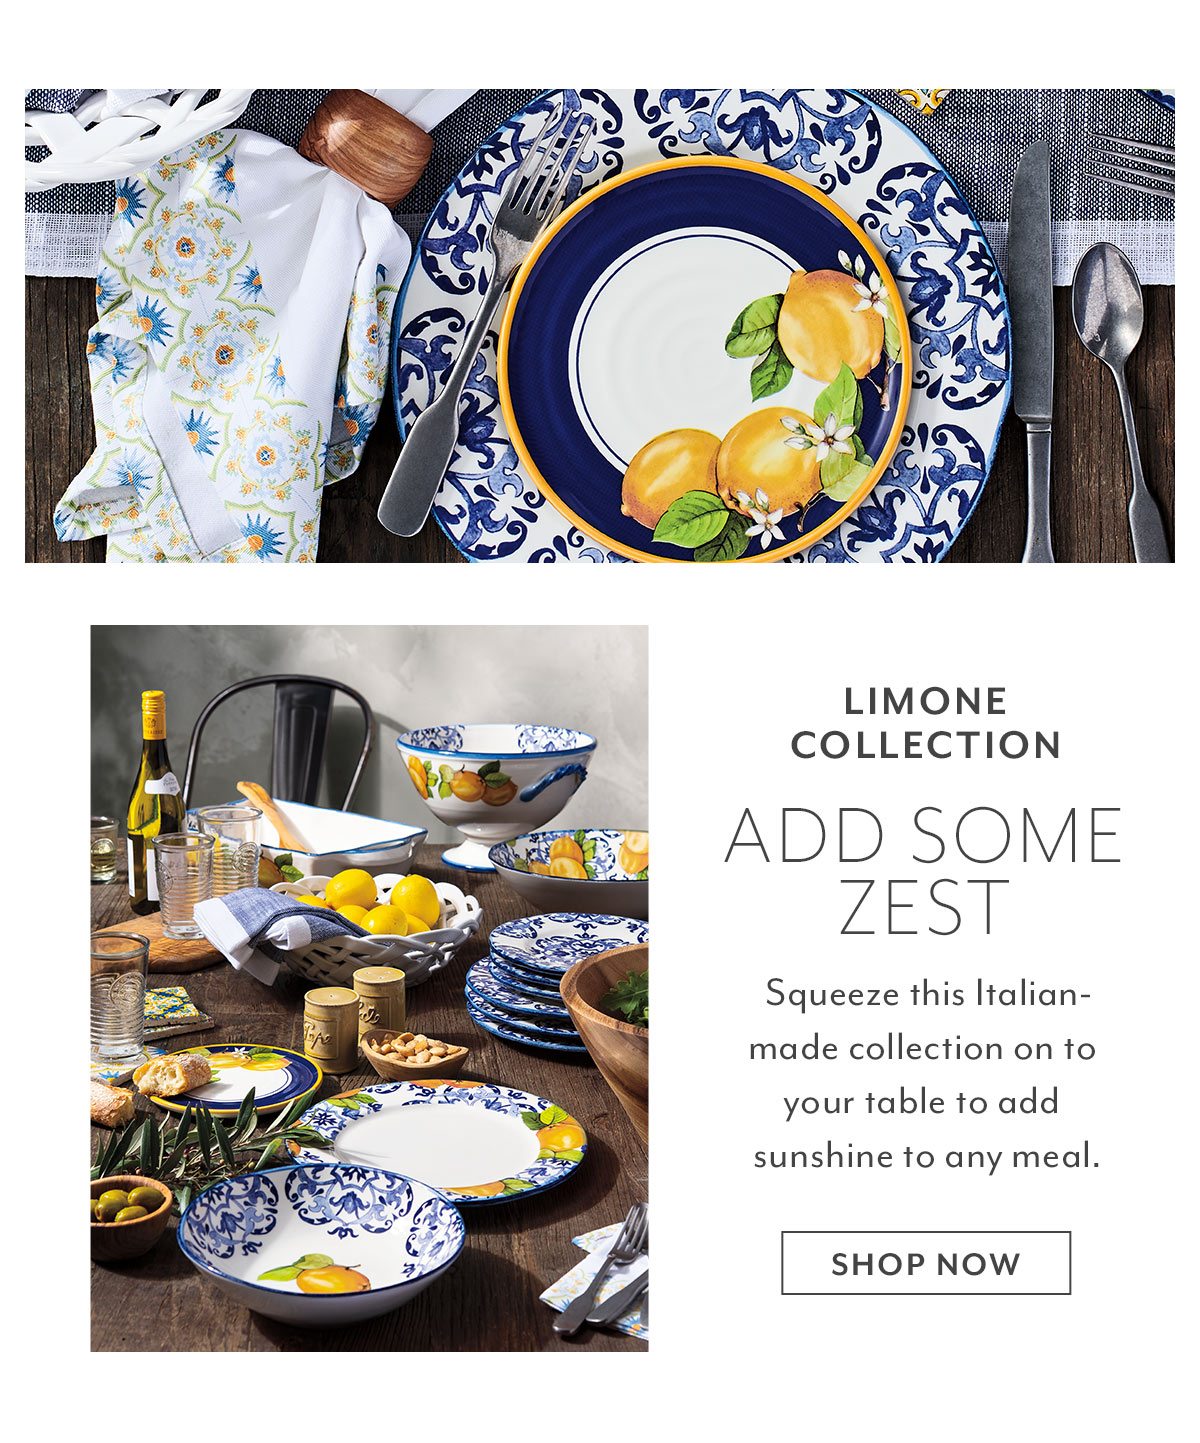 Limone Collection